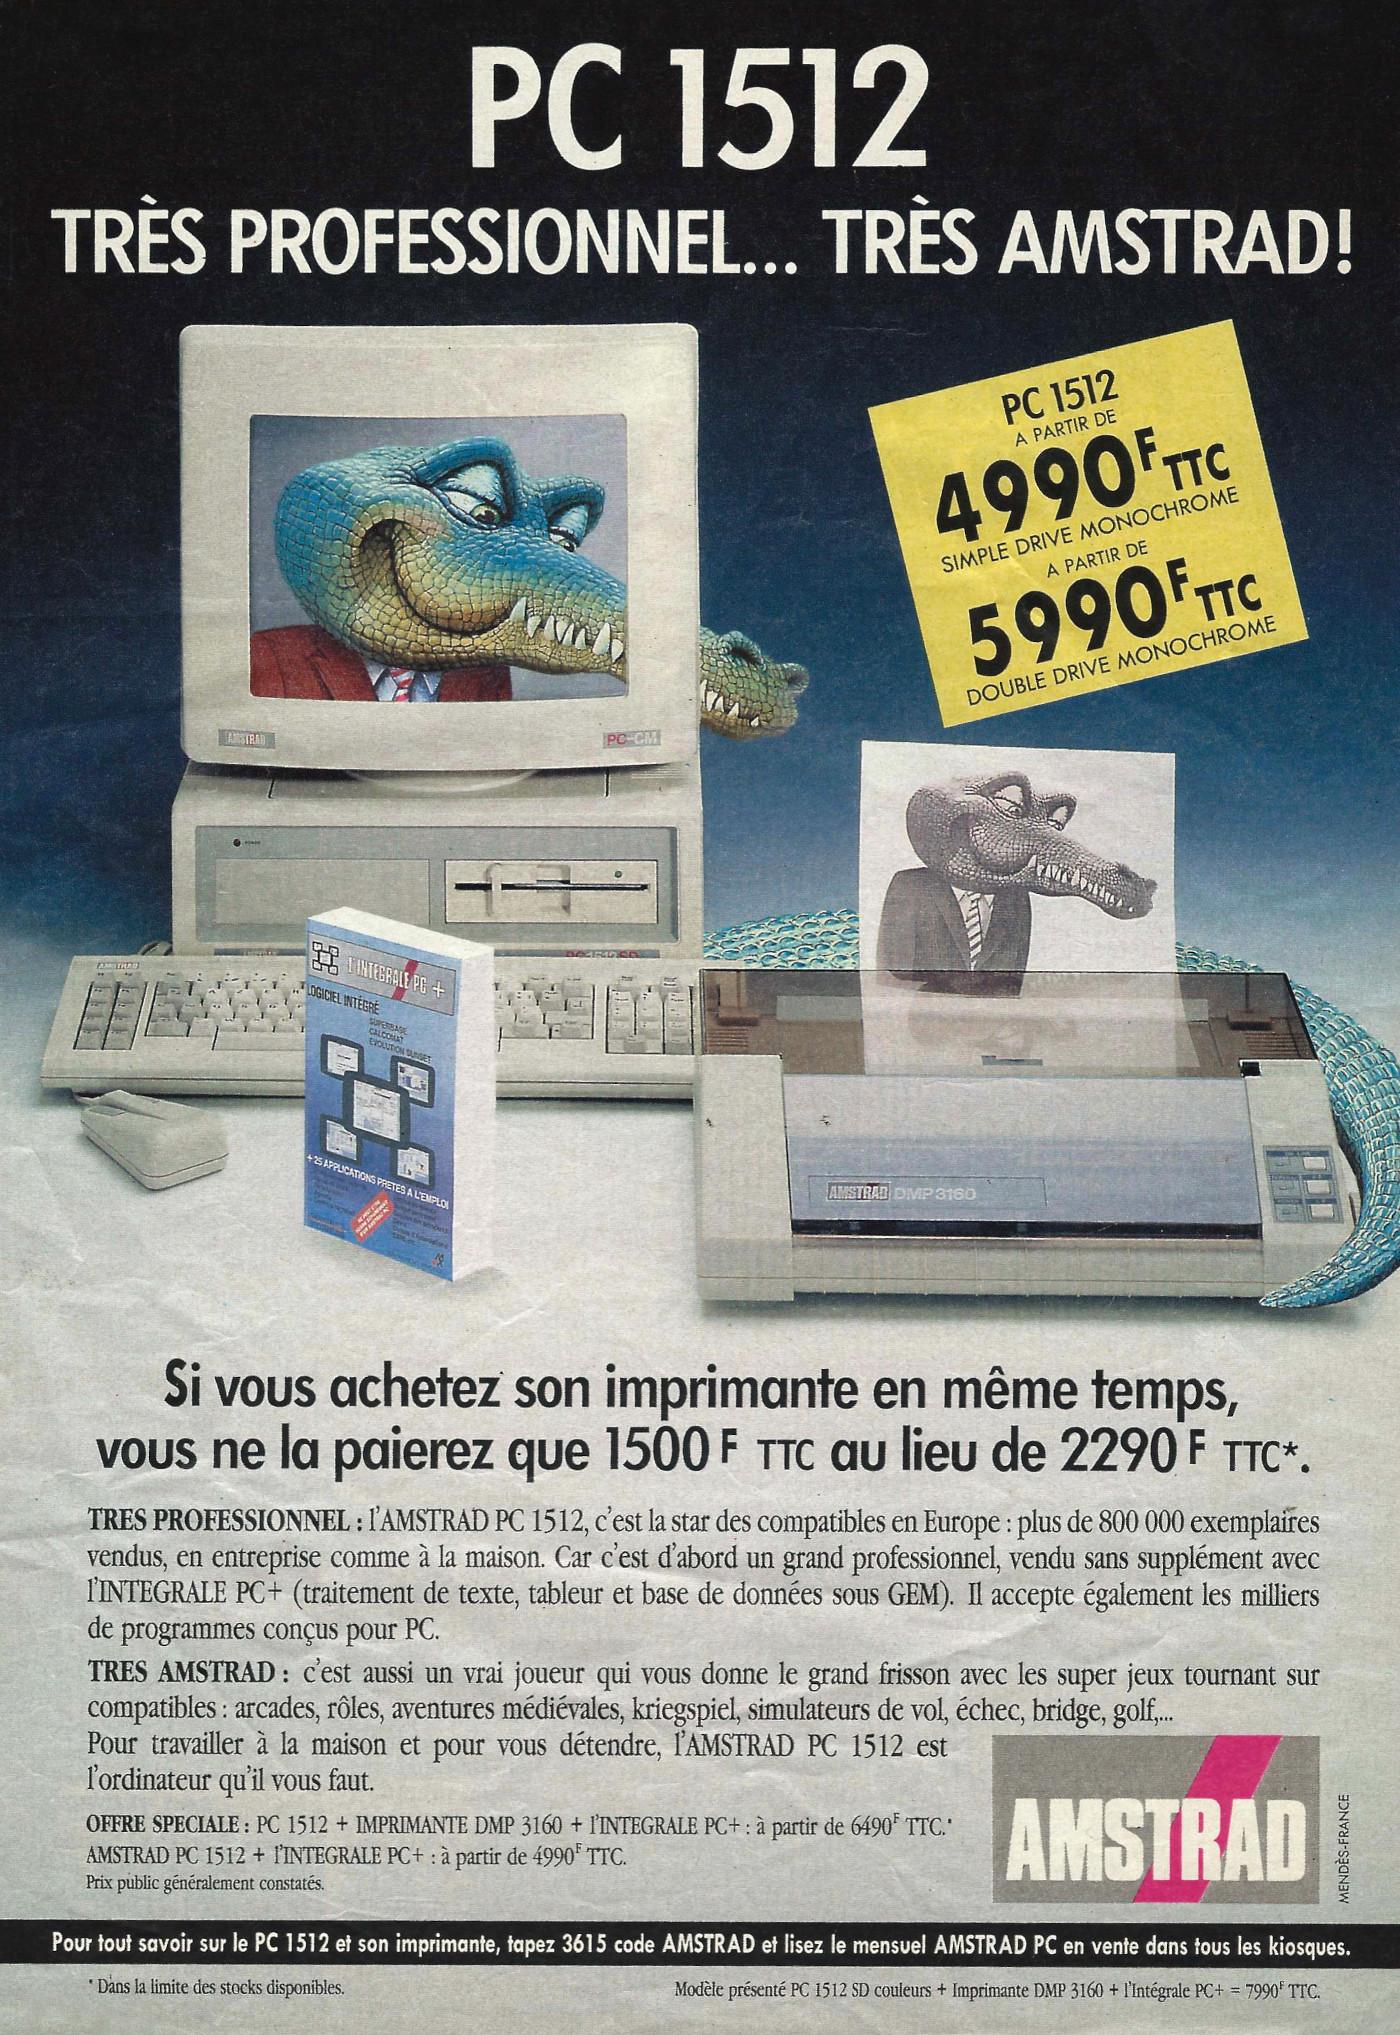 An Amstrad advert placed in a French magazine, showing the PC 1512 in a bundle offer with a printer for 1500F instead of 2290F, which is about a £79 discount, or £250 in 2024. The advert also claims that more than <span class='hilite'><span class='hilite'><span class='hilite'>800</span></span></span>,000 1512s had been sold to businesses and home users.